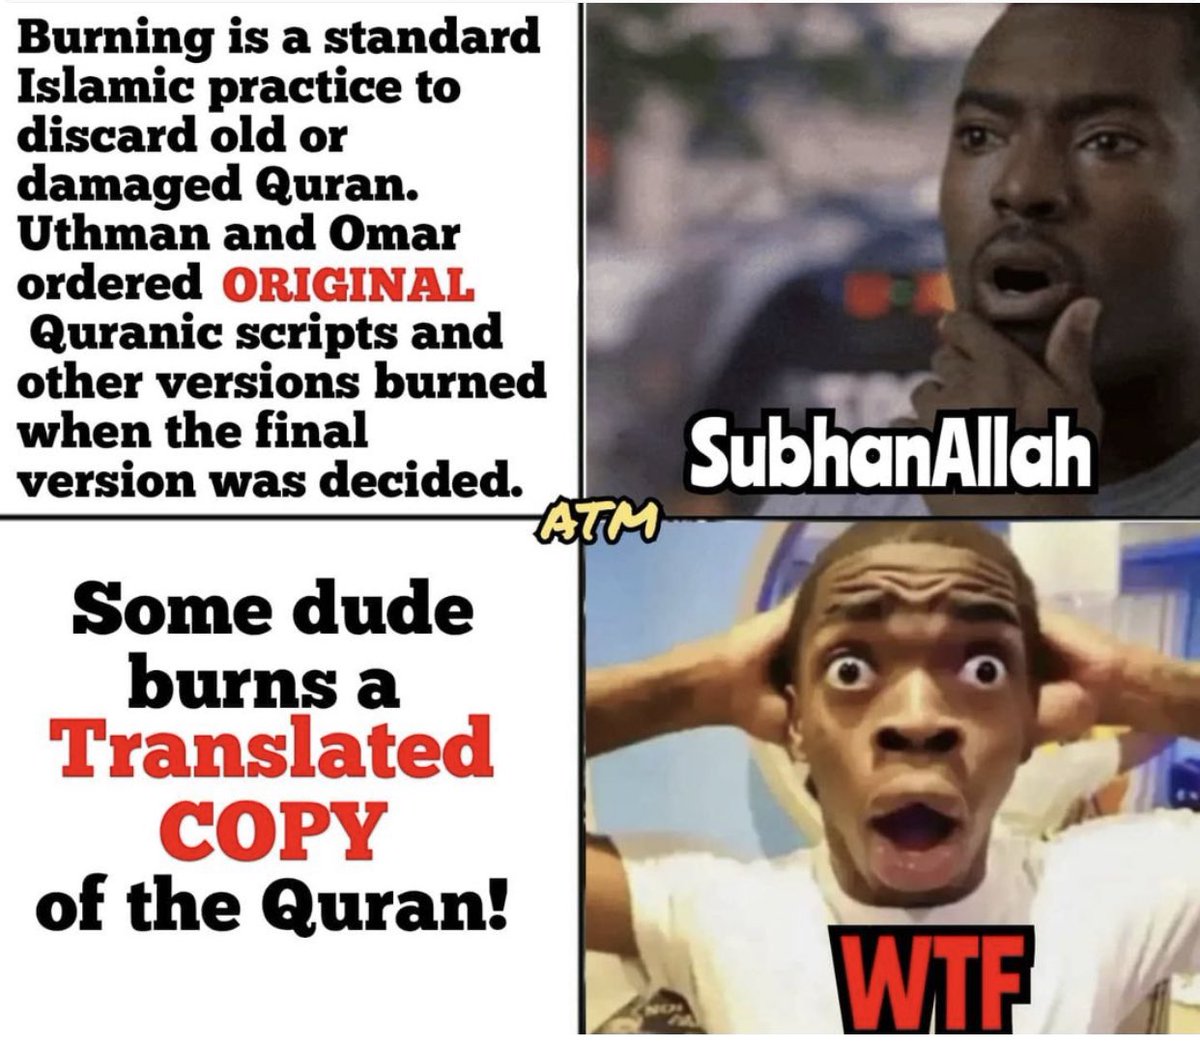 The sad reality is that burning of the Quran is the standard Islamic practice of destroying old or unwanted books. It is not haram. It would have been more haram to flush it down the toilet or throw it in the bin. If burning of the Quran was such a huge insult to Islam, Uthman,…